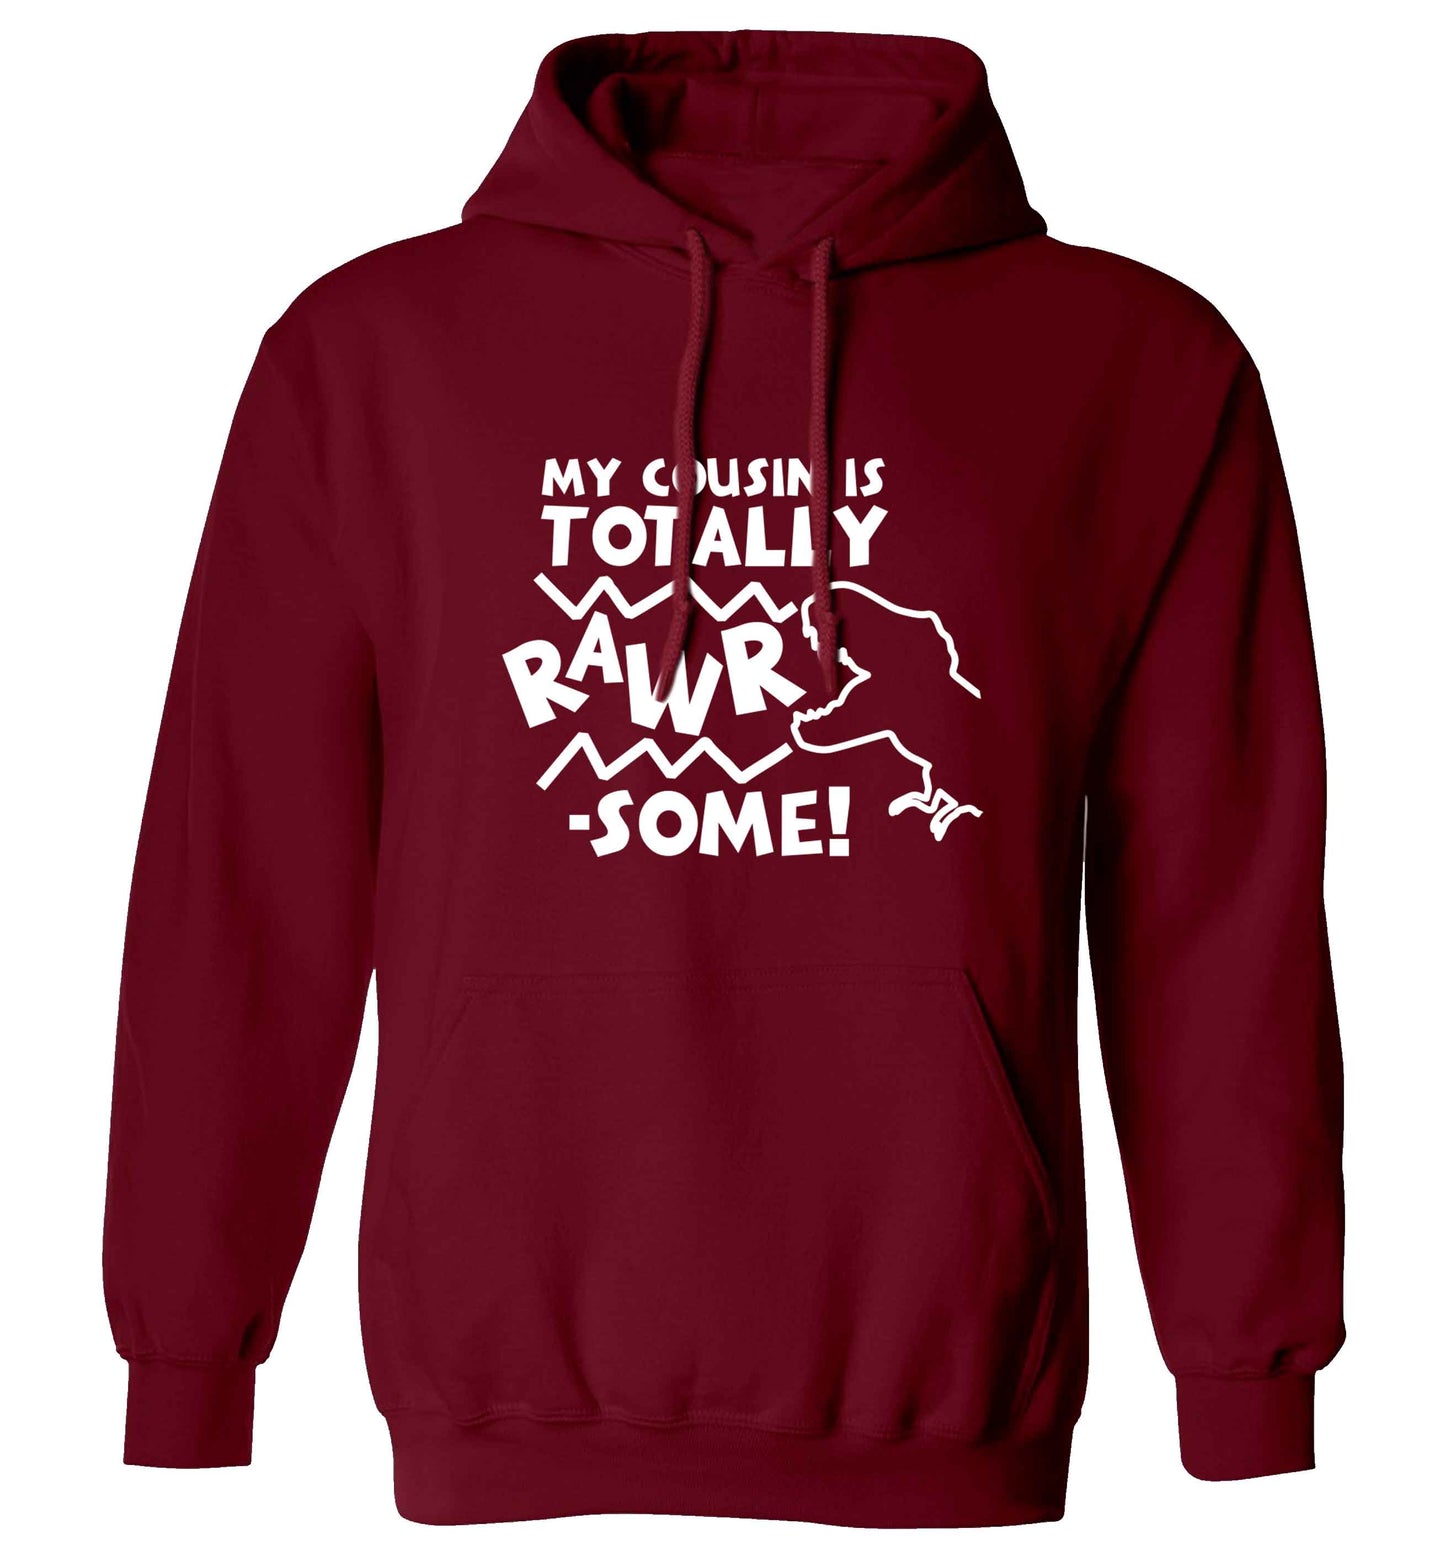 My cousin is totally rawrsome adults unisex maroon hoodie 2XL